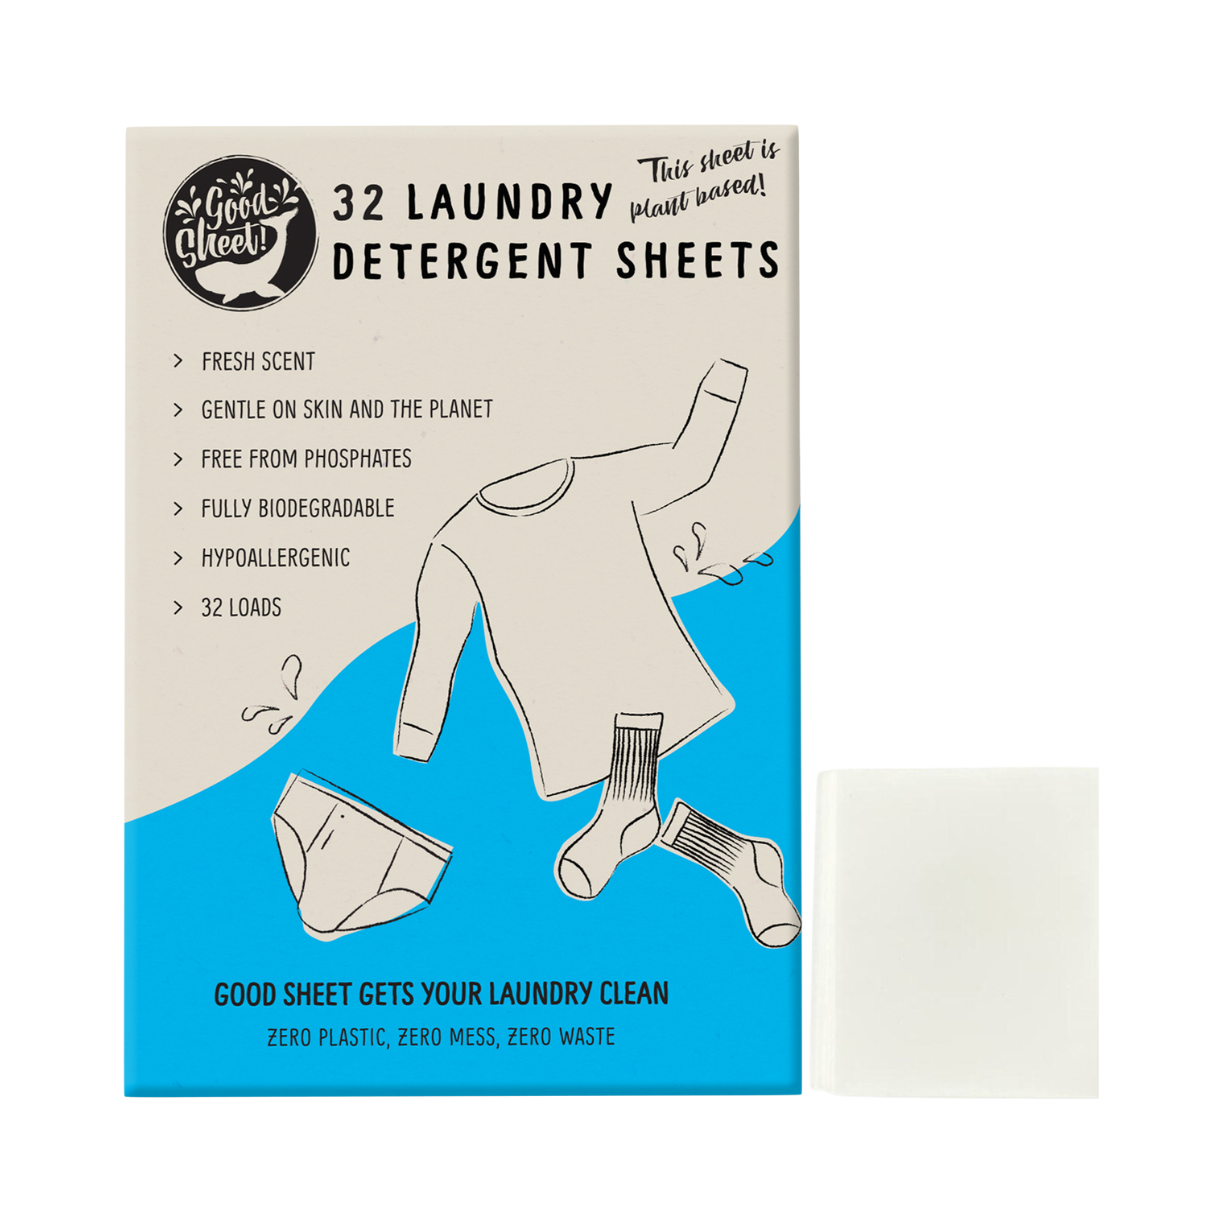 Laundry Detergent Sheet Travel Pack, Non-Scented (6 Load